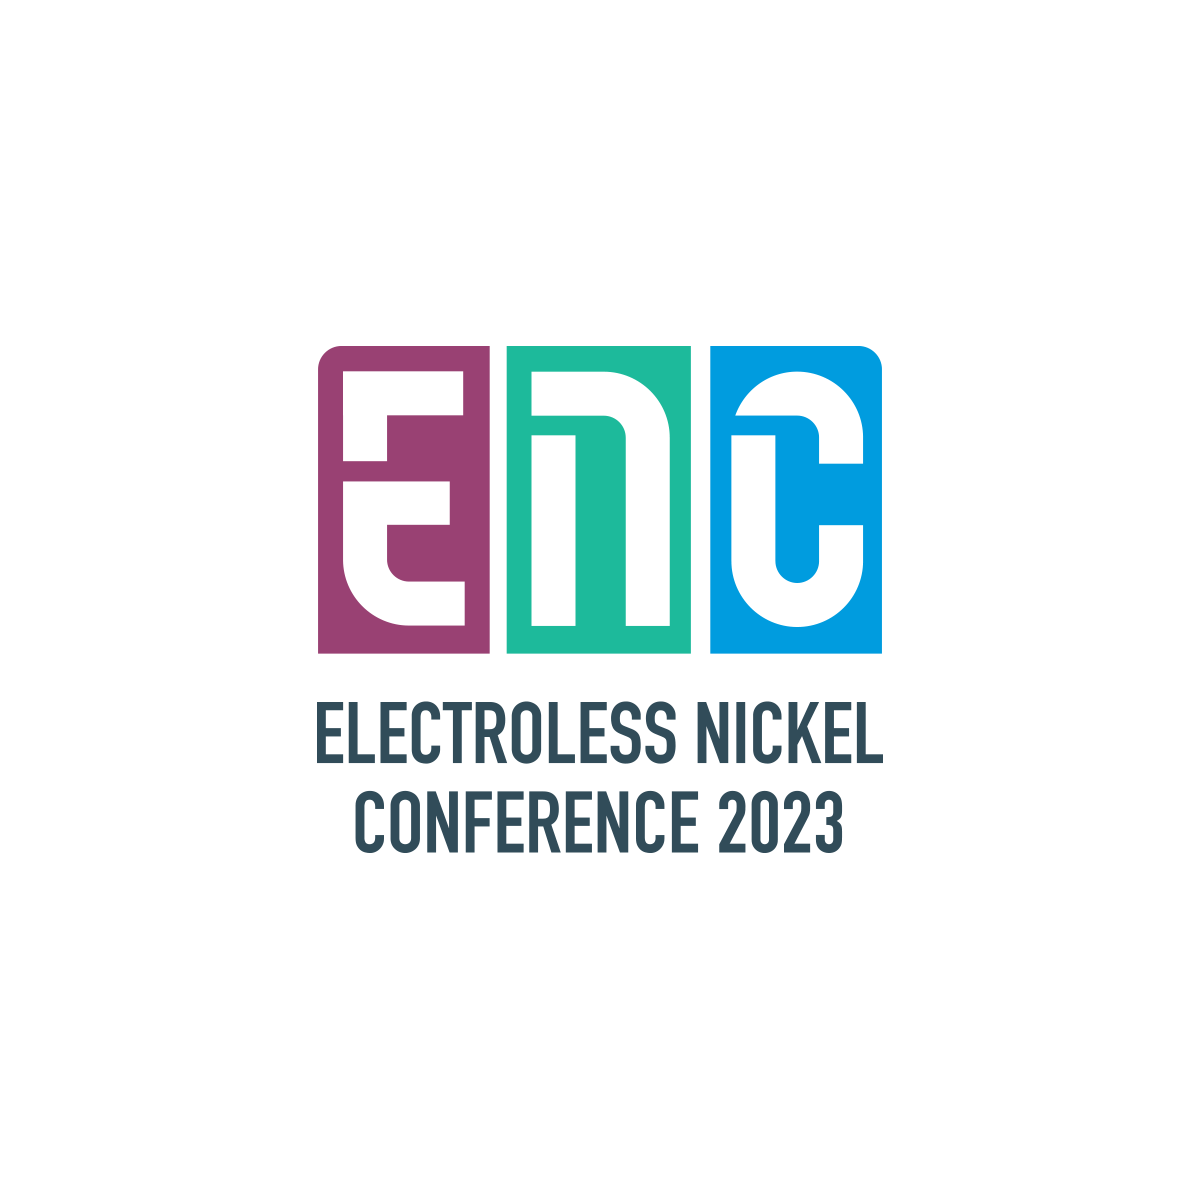 Electroless Nickel Conference